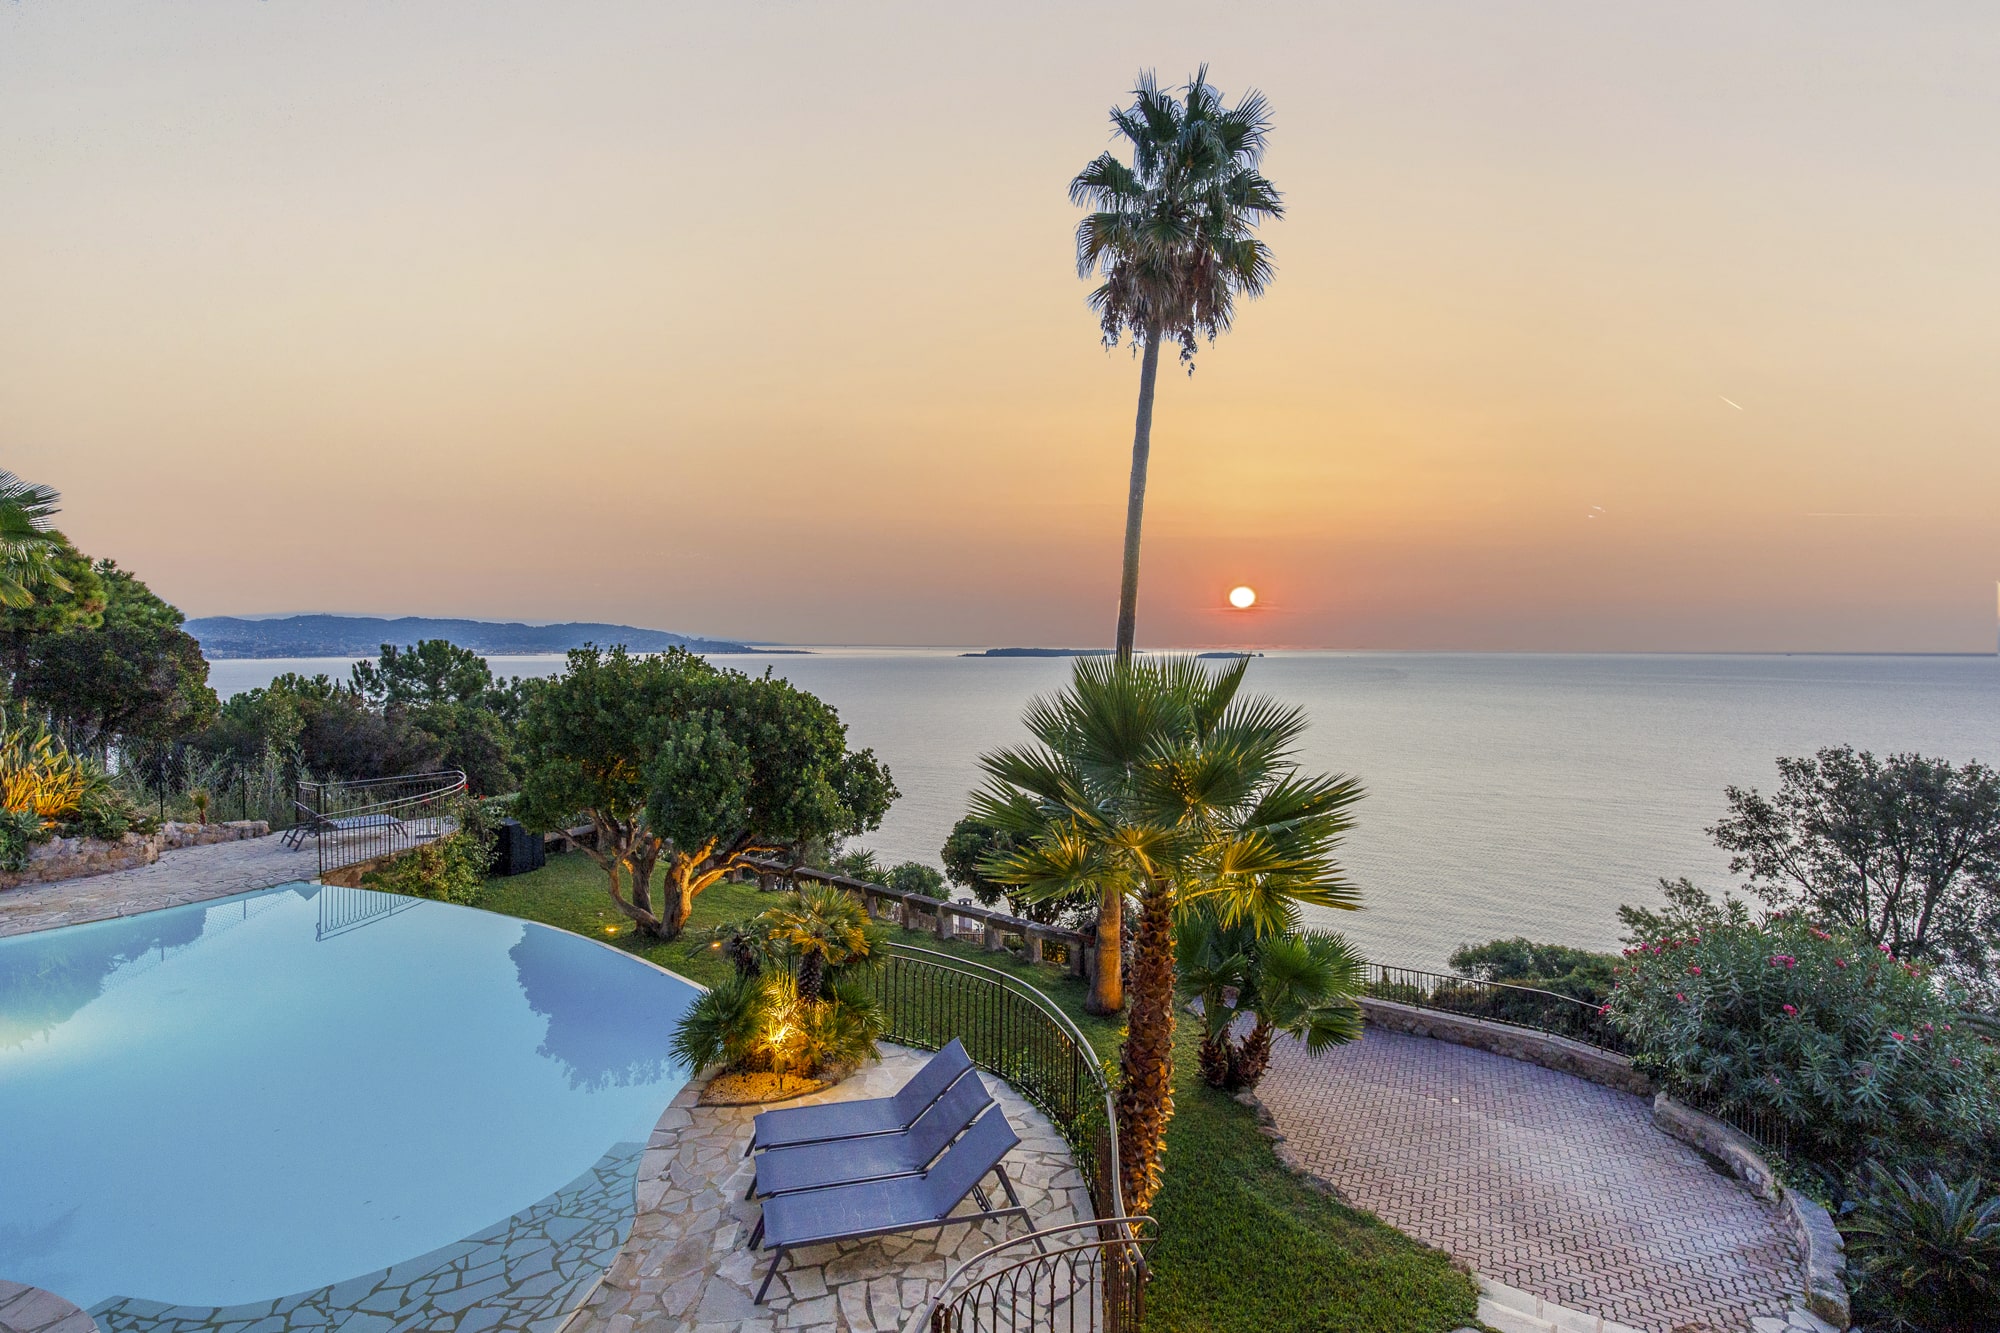 Property Image 1 - Magnificent villa with sea view in Théoule sur mer - by feelluxuryholidays